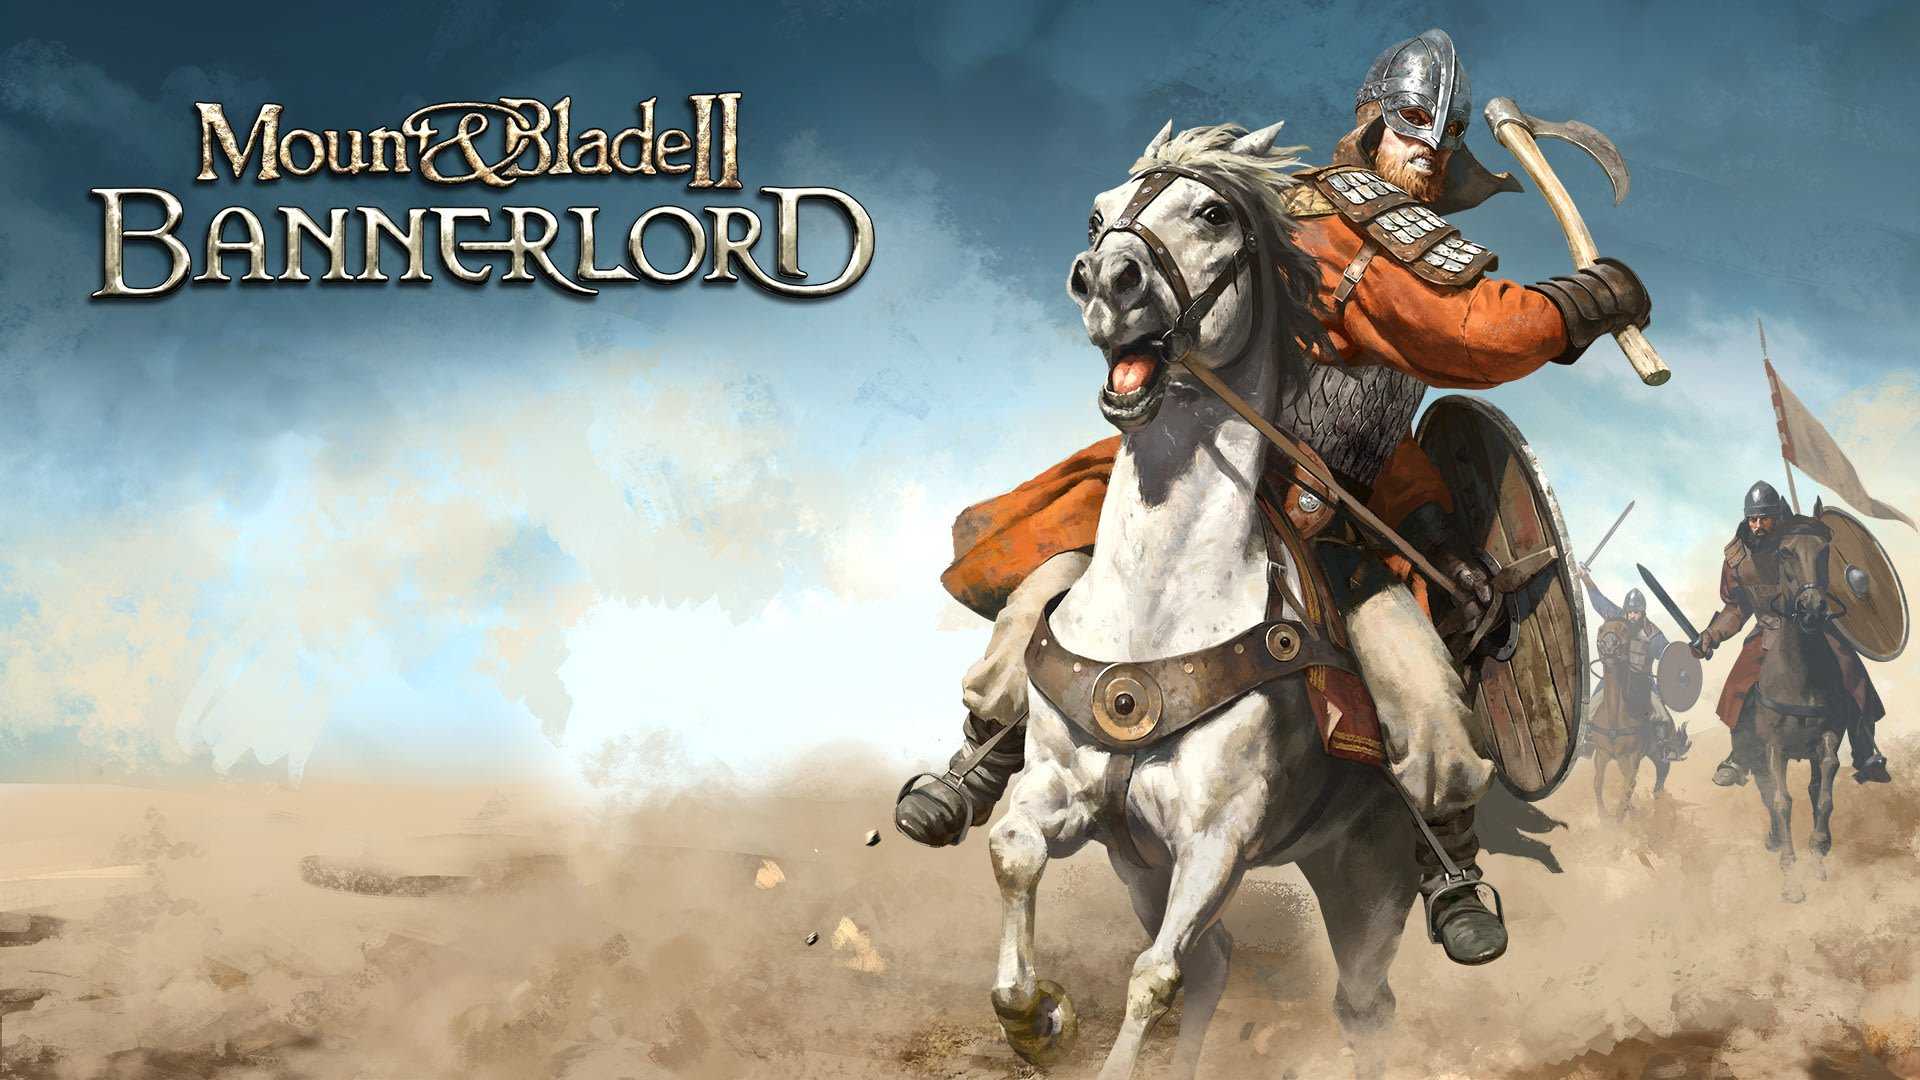 Mount and blade 2 bannerlord cannot load taleworlds mount and blade launcher steam dll (120) фото